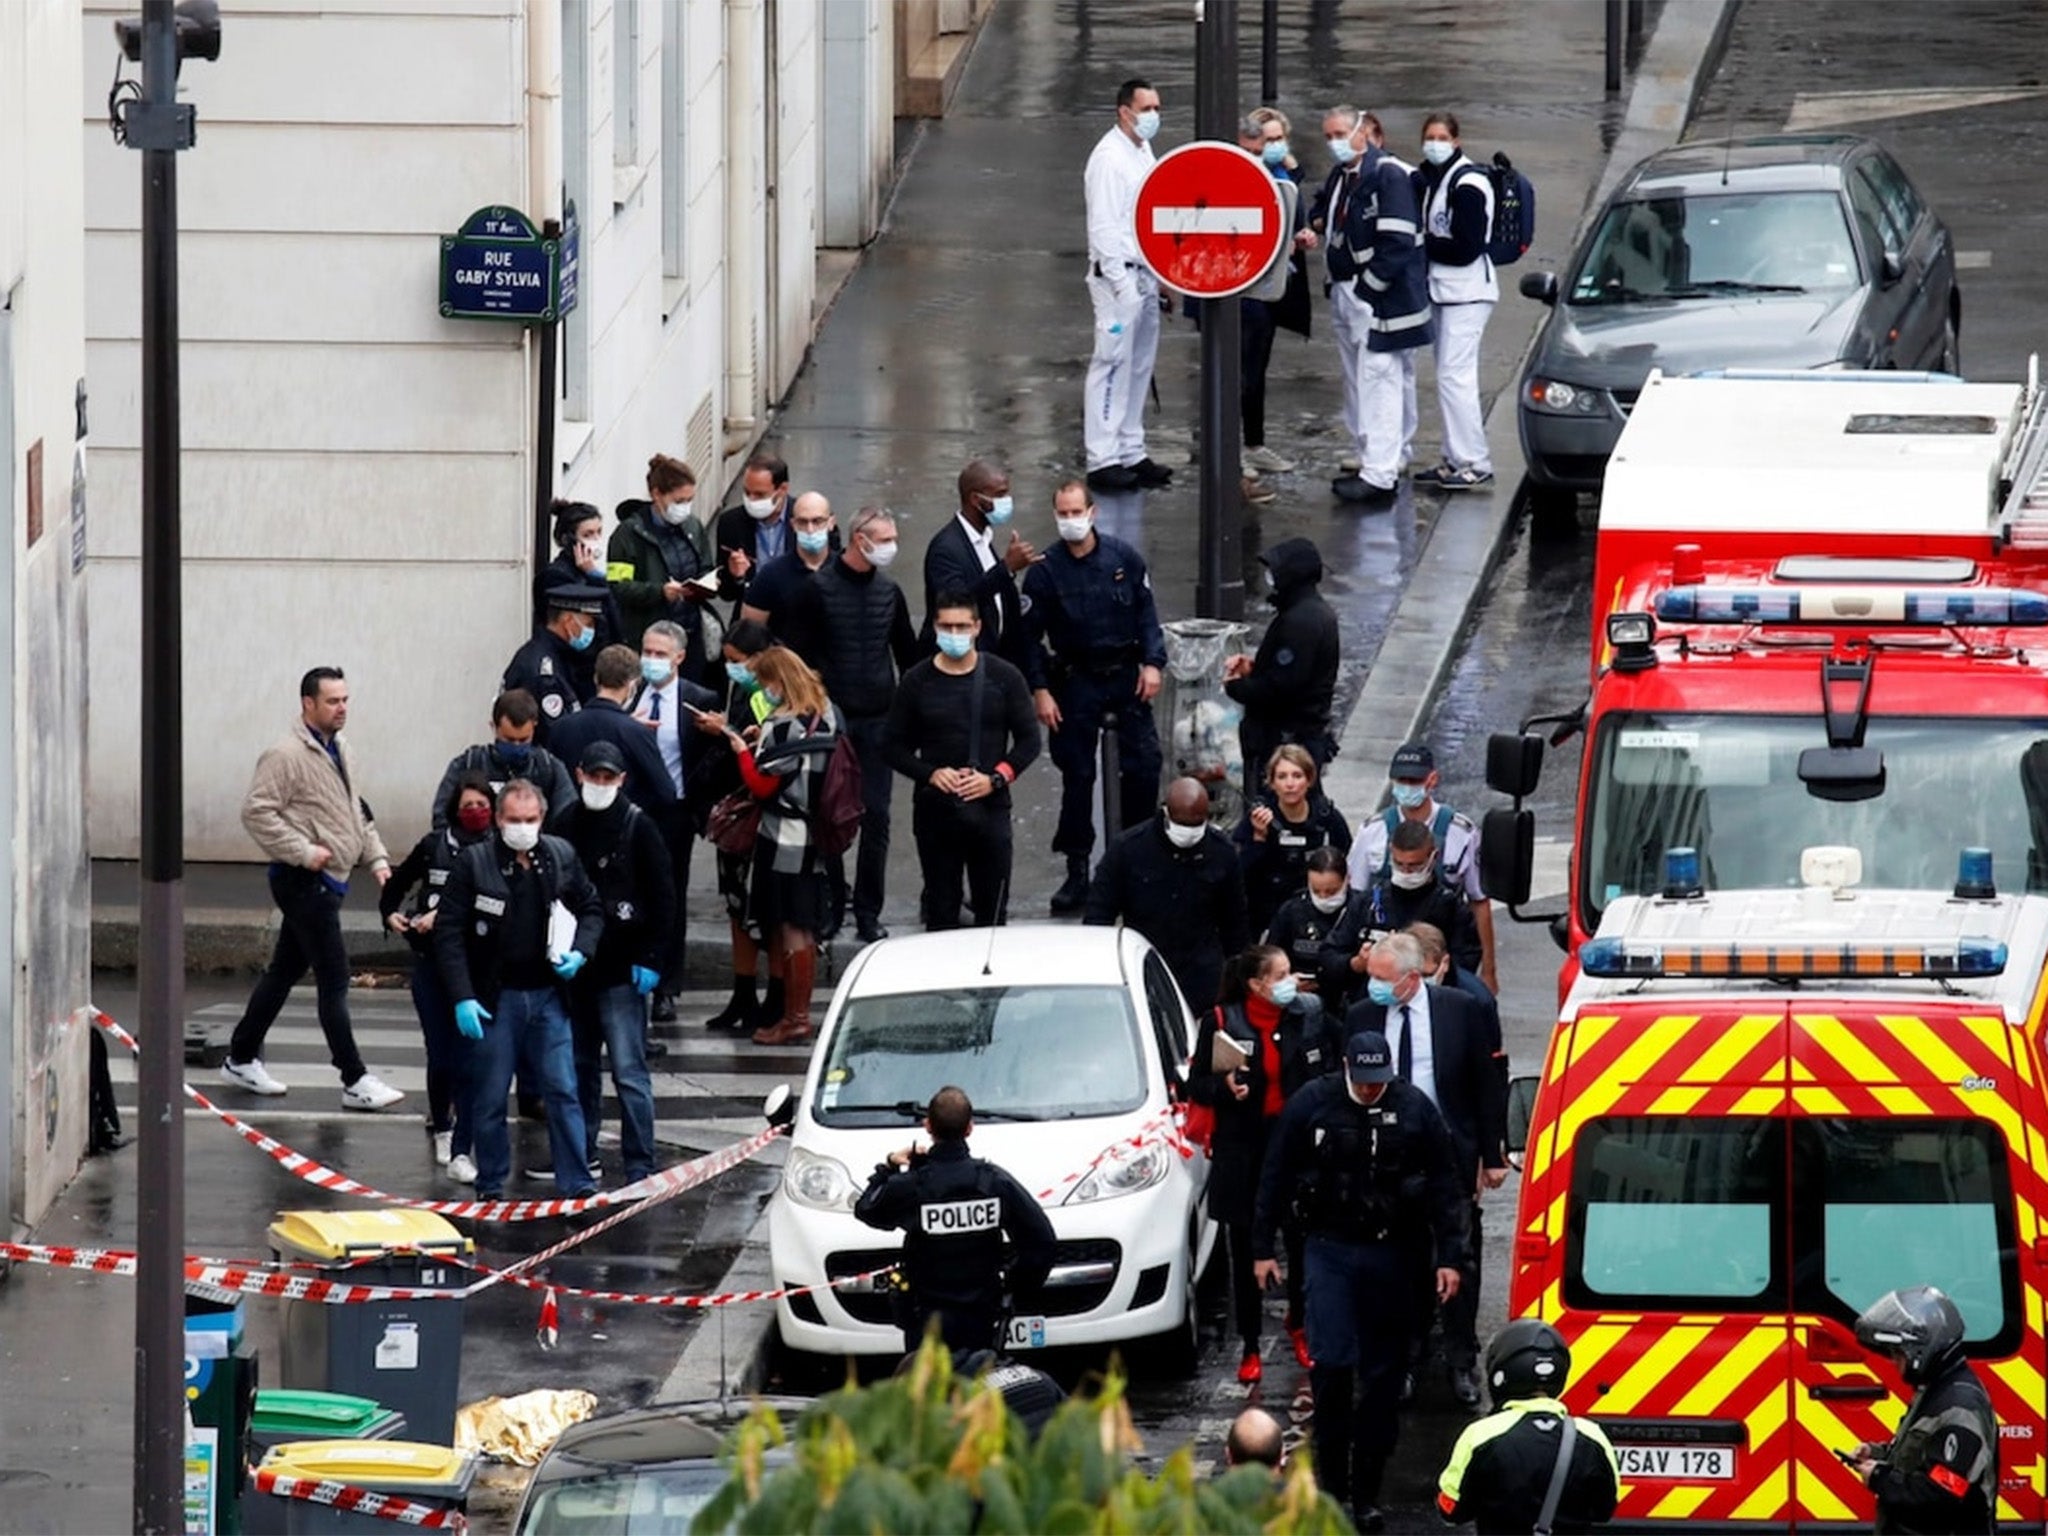 Cordons on the streets surrounding former Charlie Hebdo offices